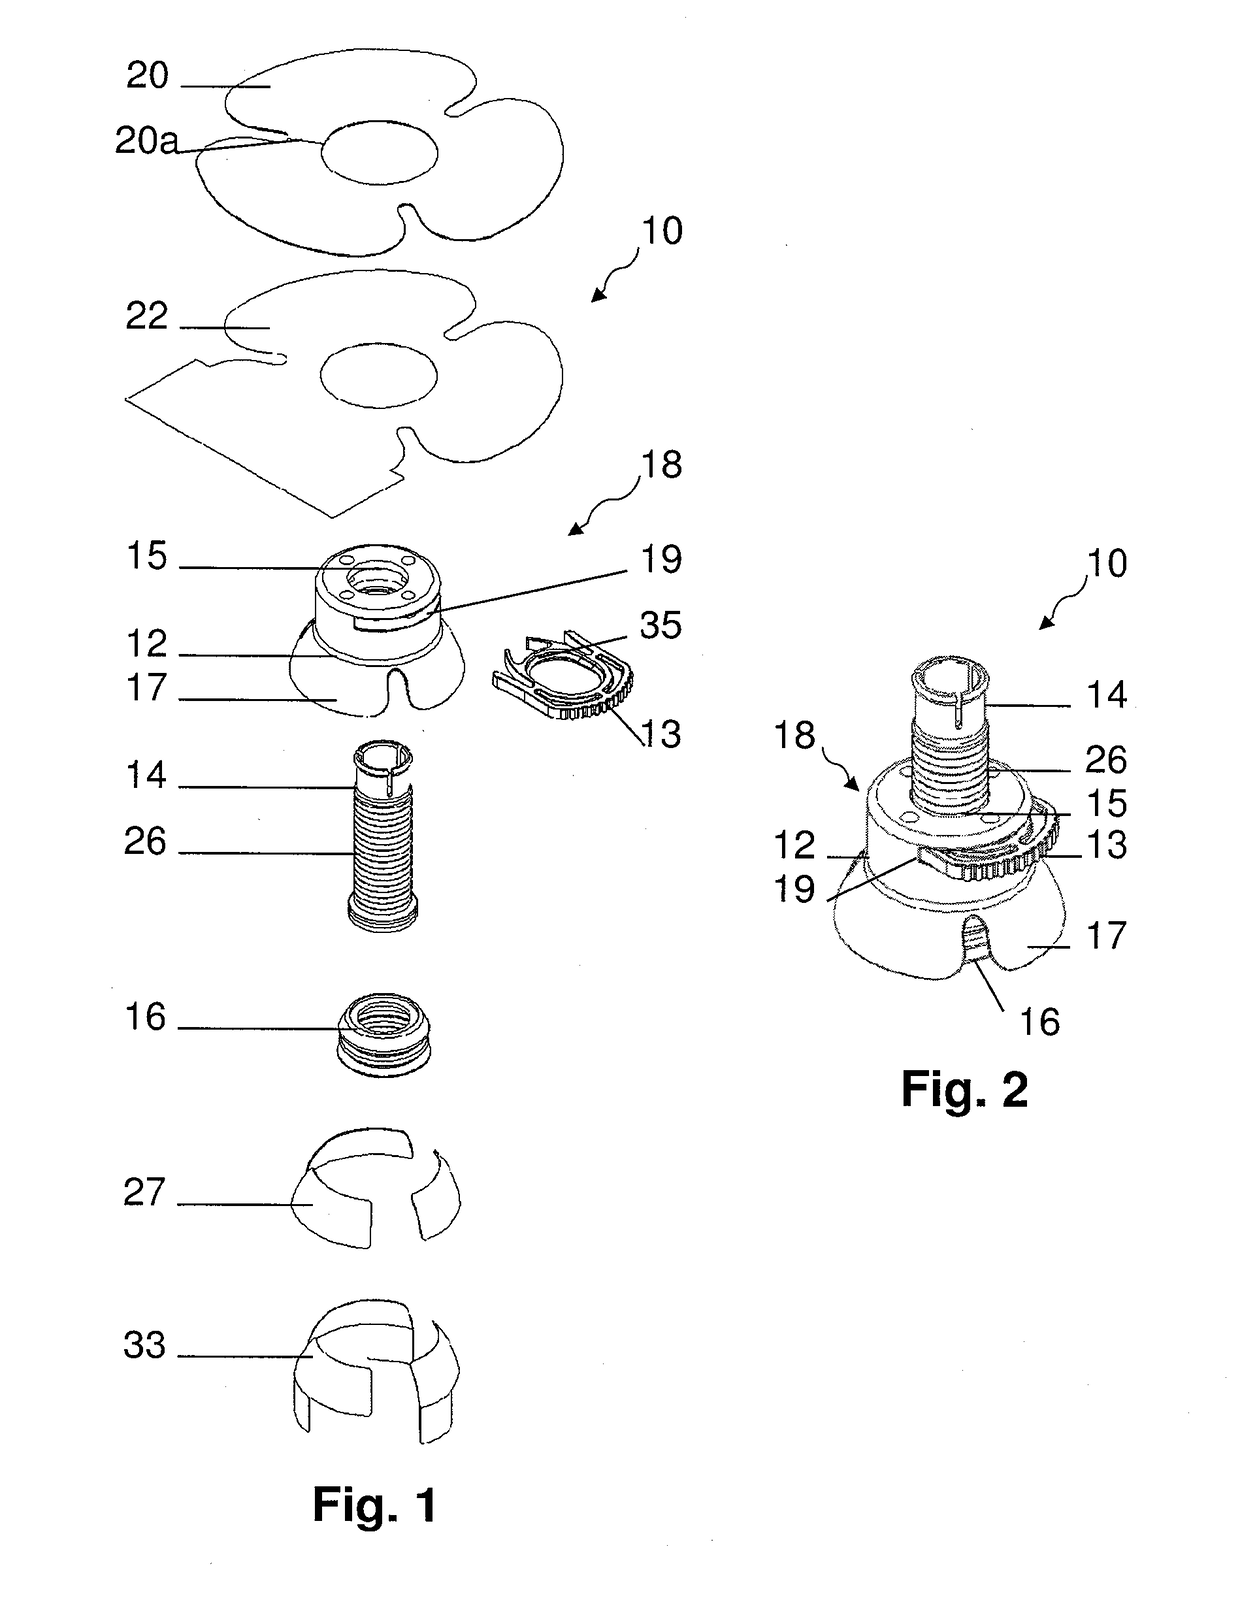 A human external urinary incontinence treatment method and device